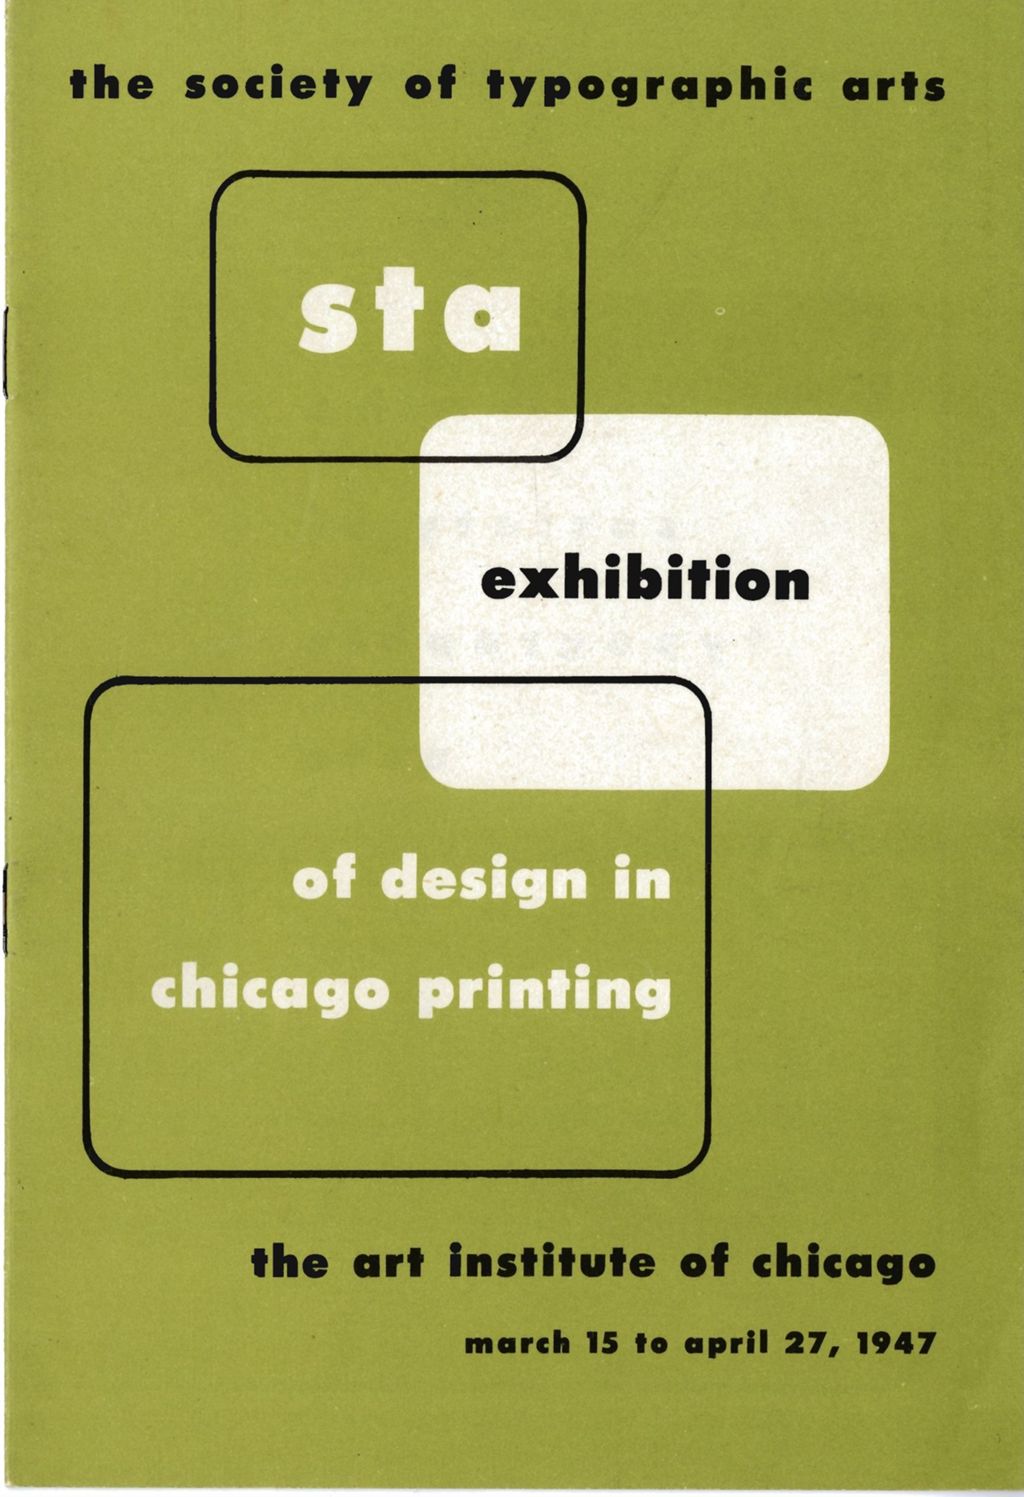 Miniature of The Society of Typographic Arts 20th Annual Exhibition of Design in Chicago Printing